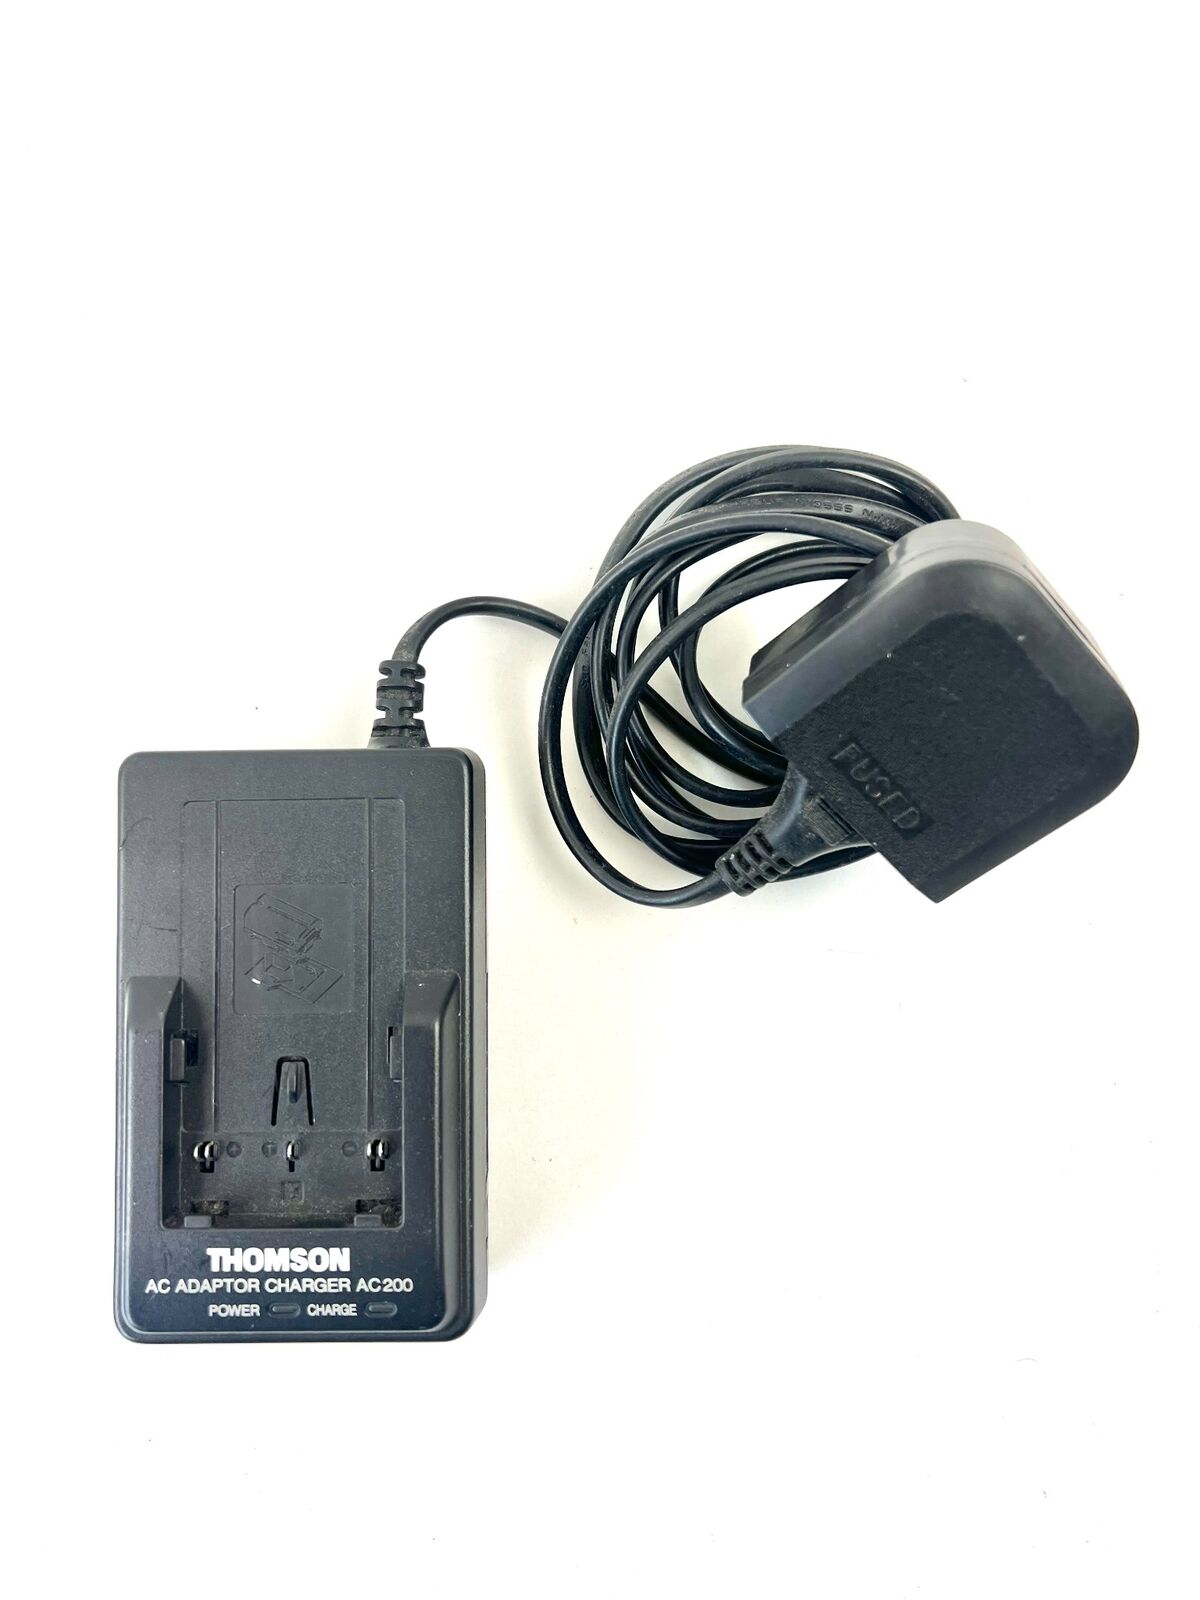 Thomson AC Adaptor Charger AC200 Charging Battery Cradle Camcorder Mains Supply Brand Thomson Type Cradles/Docks Batter - Click Image to Close